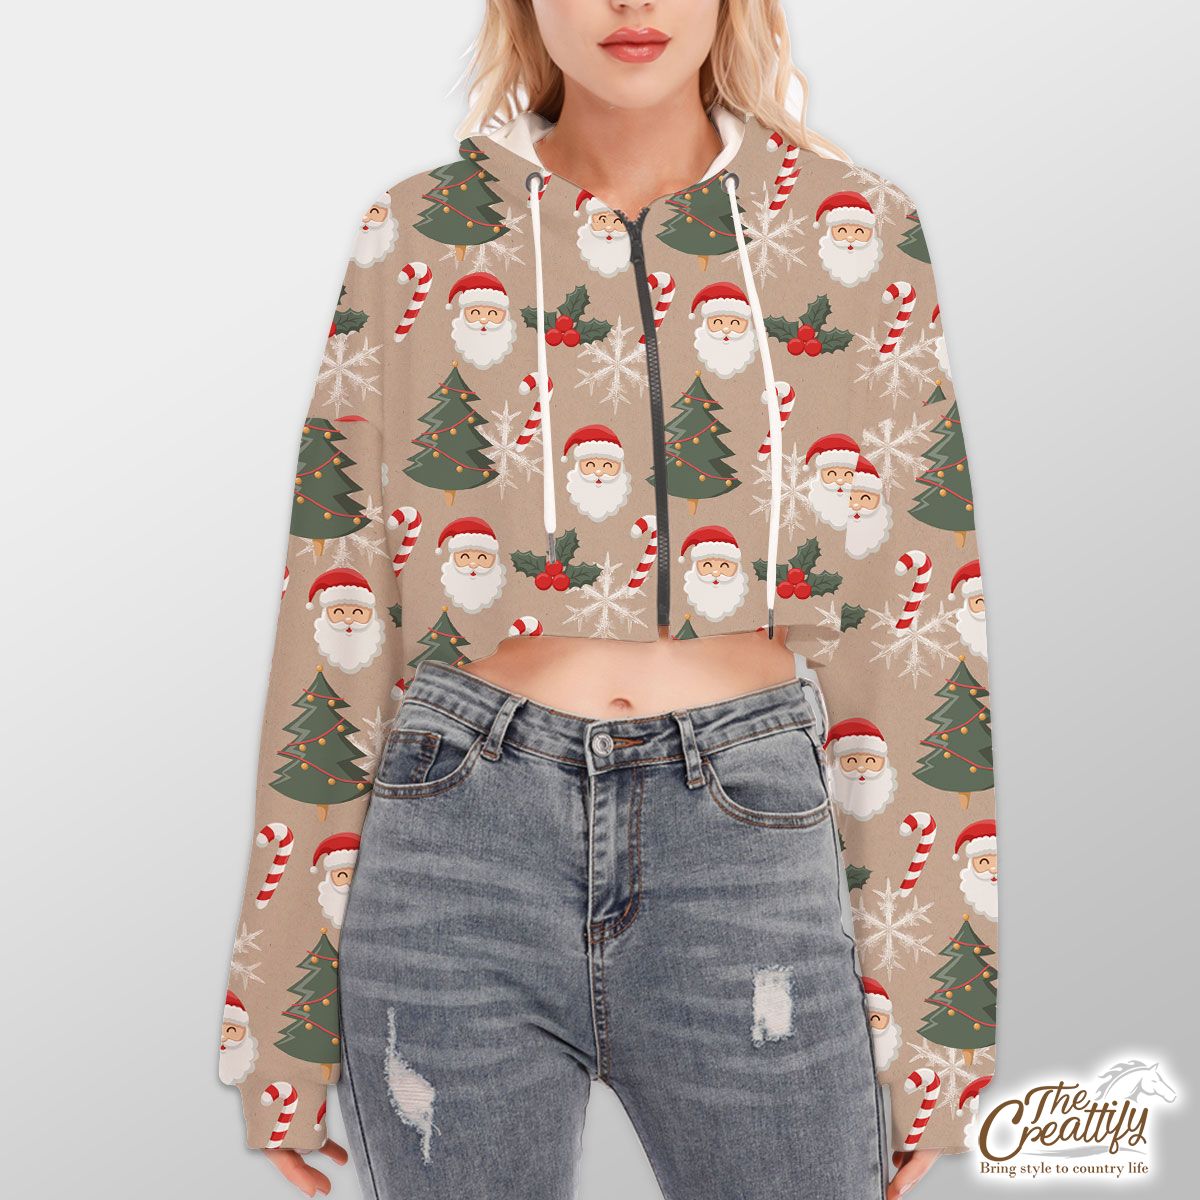 Santa Clause, Christmas Tree, Candy Cane, Holly Leaf On Snowflake Background Hoodie With Zipper Closure